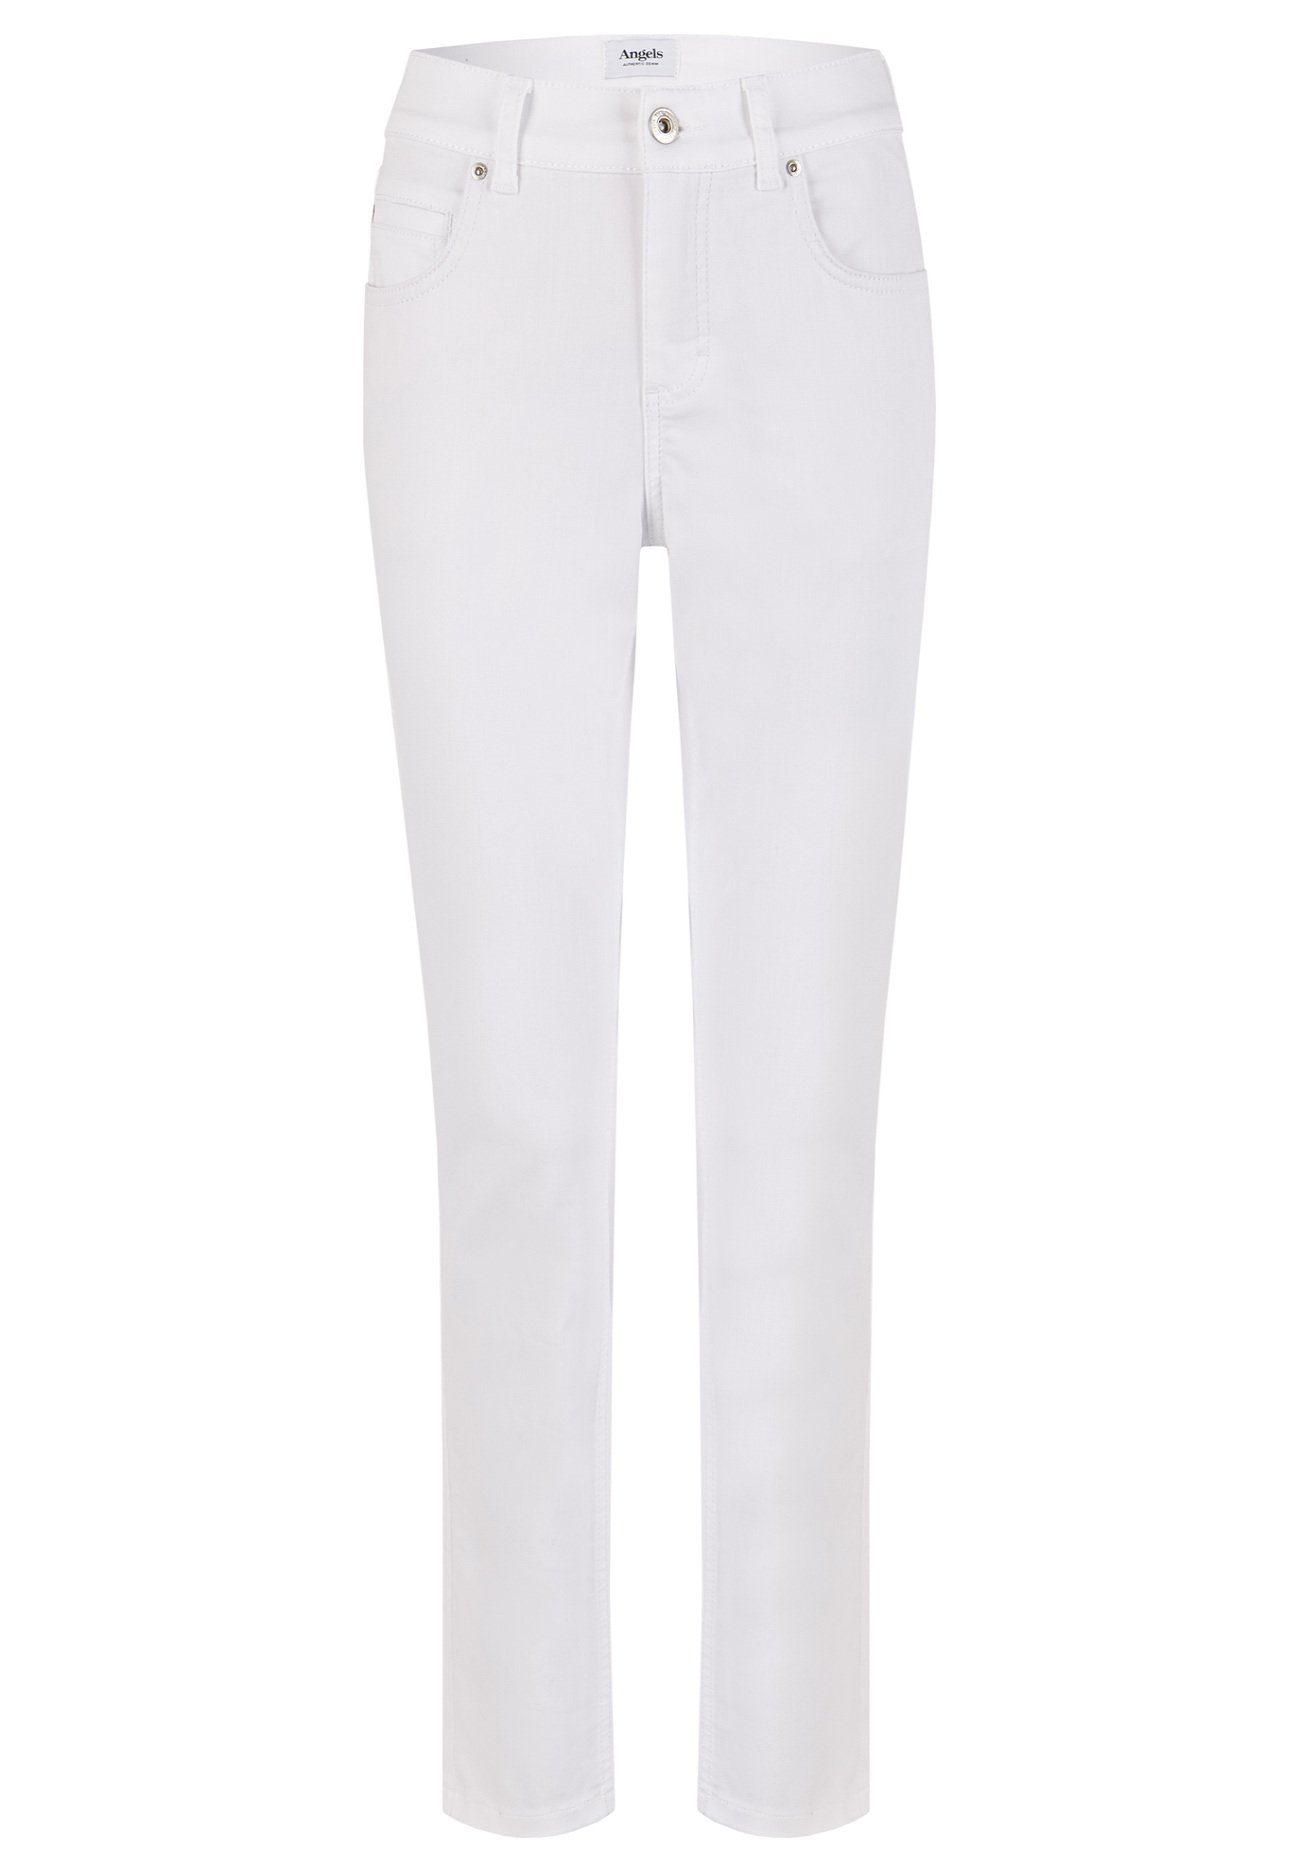 ANGELS Stretch-Jeans ANGELS JEANS CICI white 332 3400.70 - STRETCH